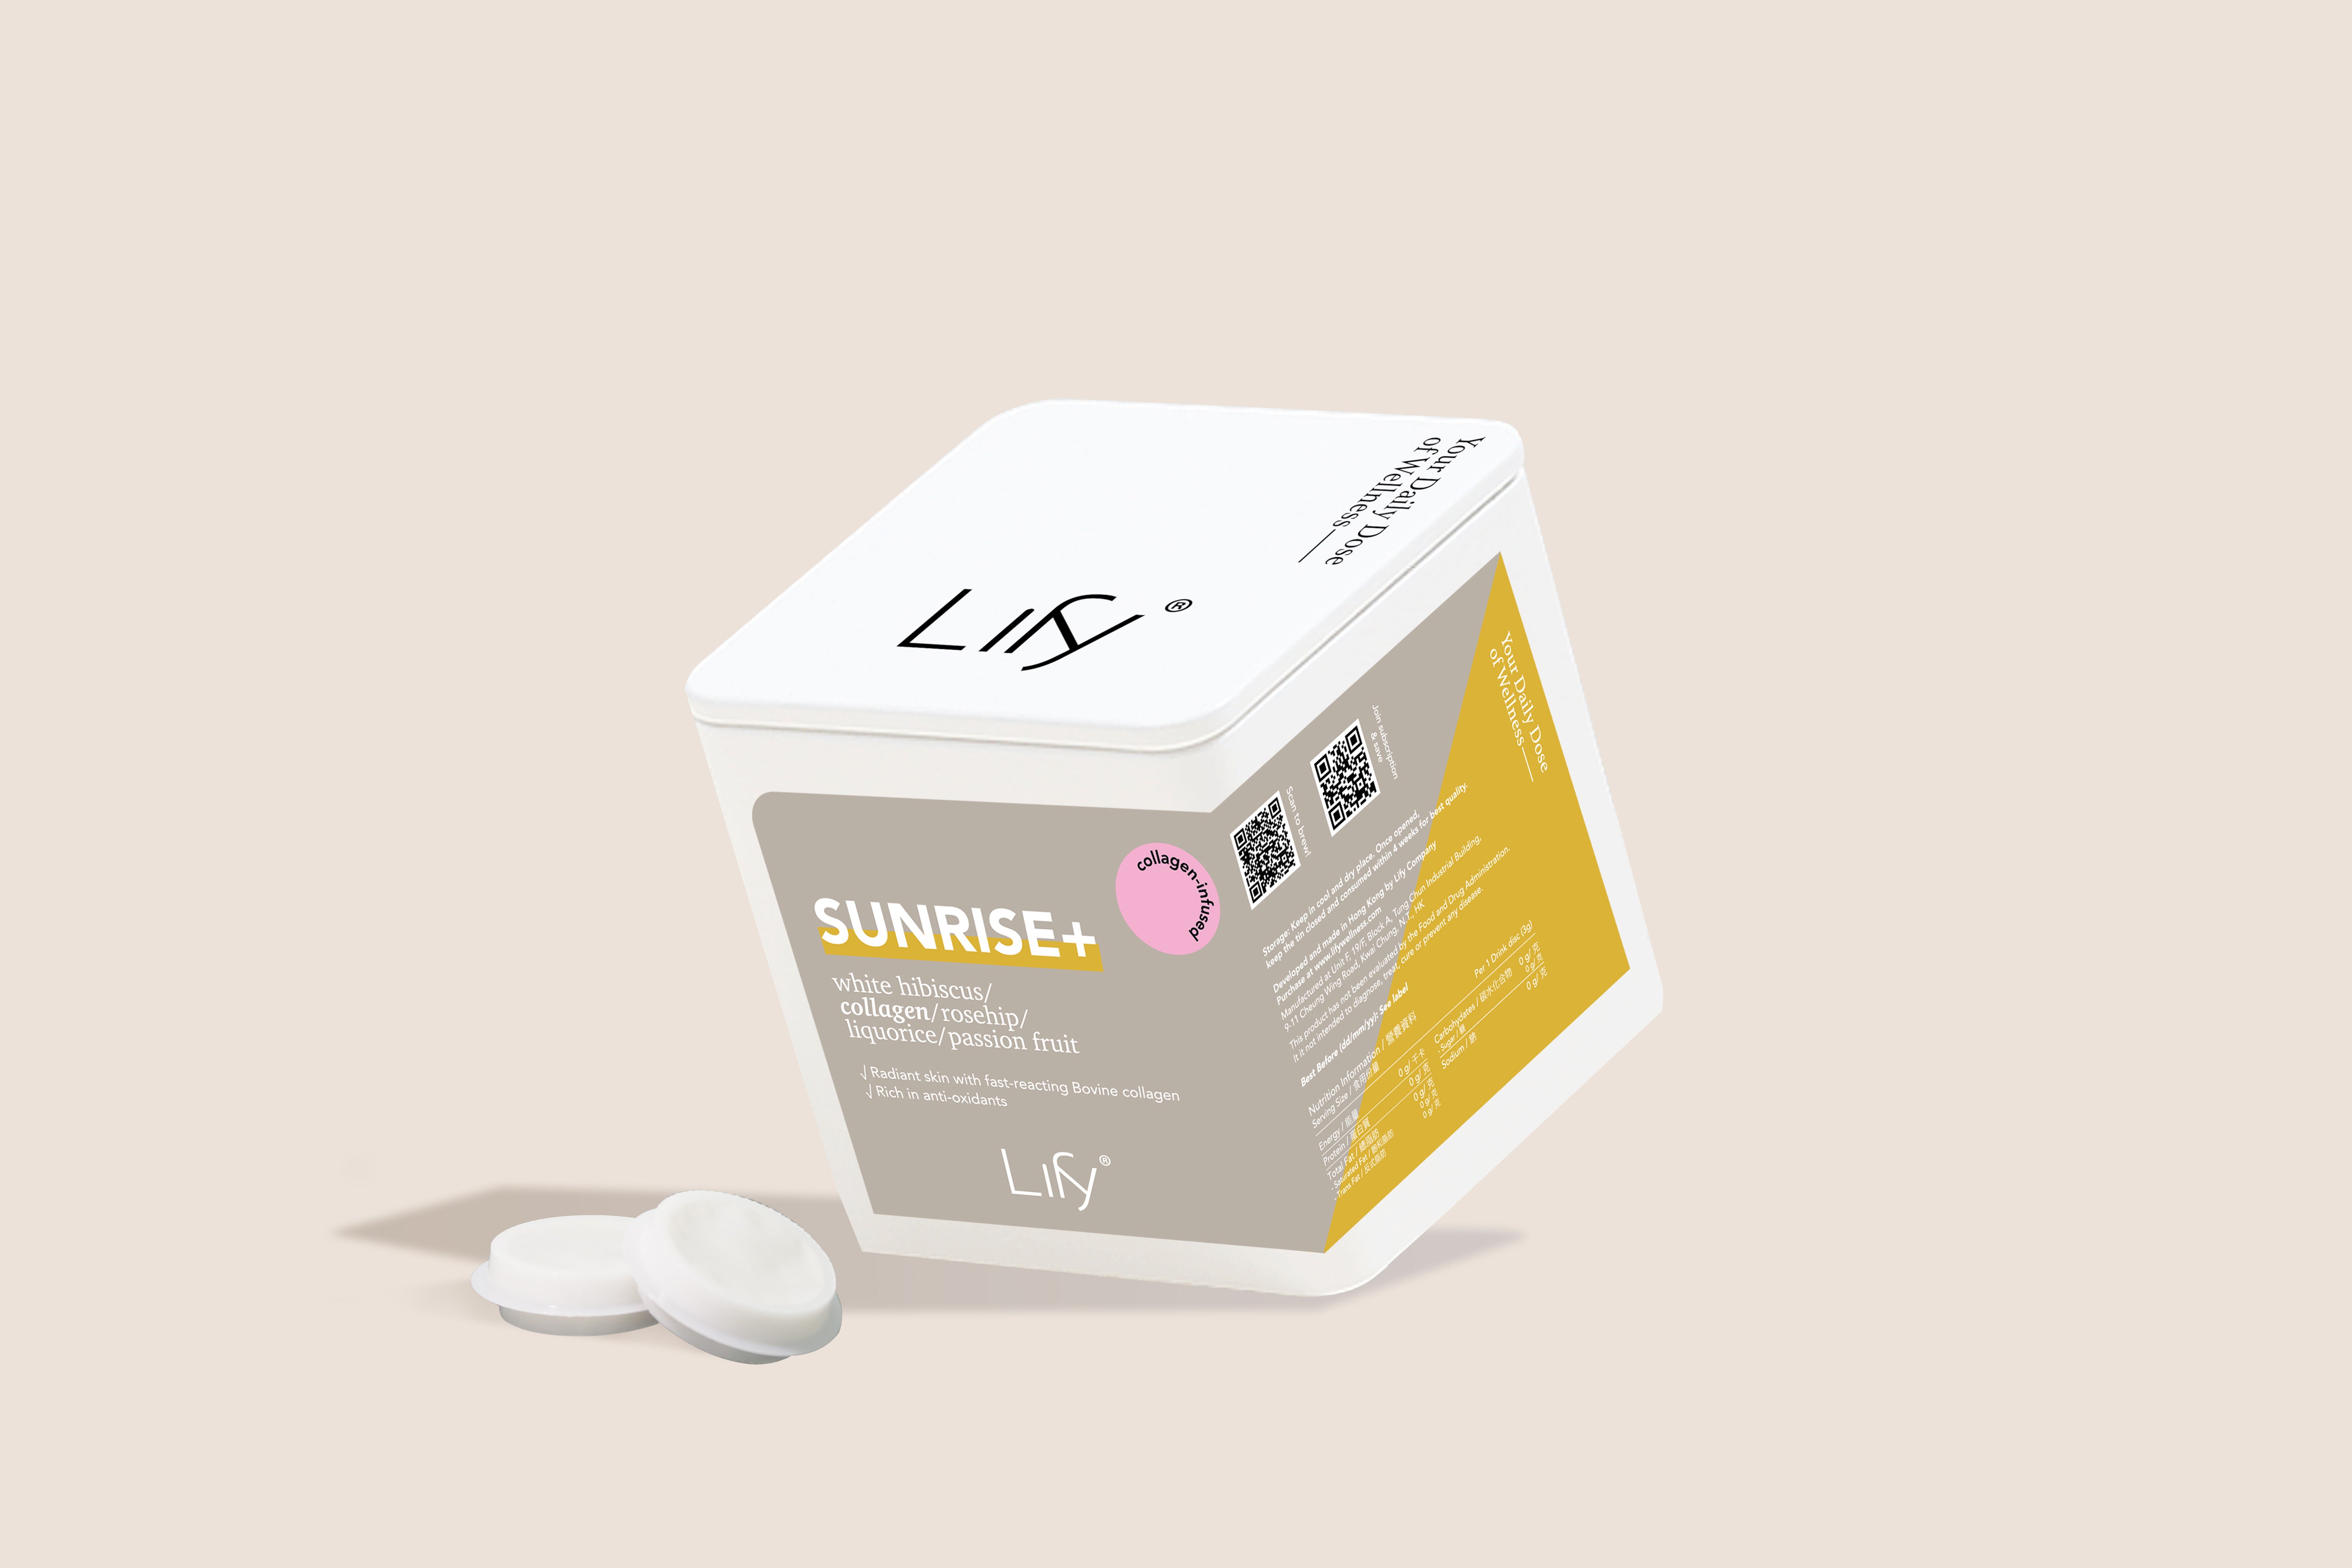 Sunrise+ with Collagen - Lify Wellness